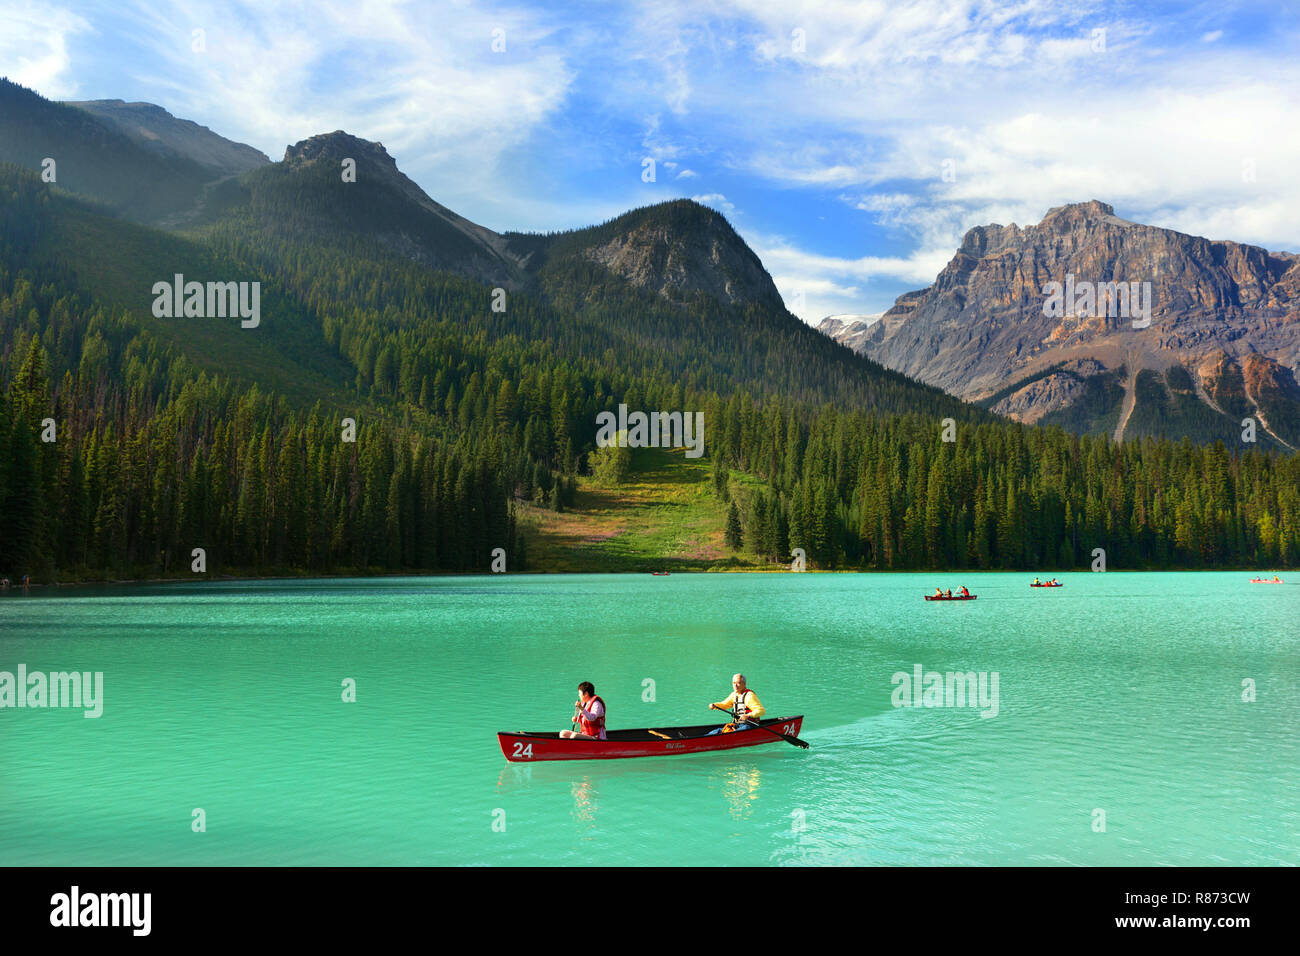 Banff, Canada - Sep 10th 2018 - A mature couple having fun in a kayak in the green color lake Emerald with beautiful pine trees in the background in C Stock Photo